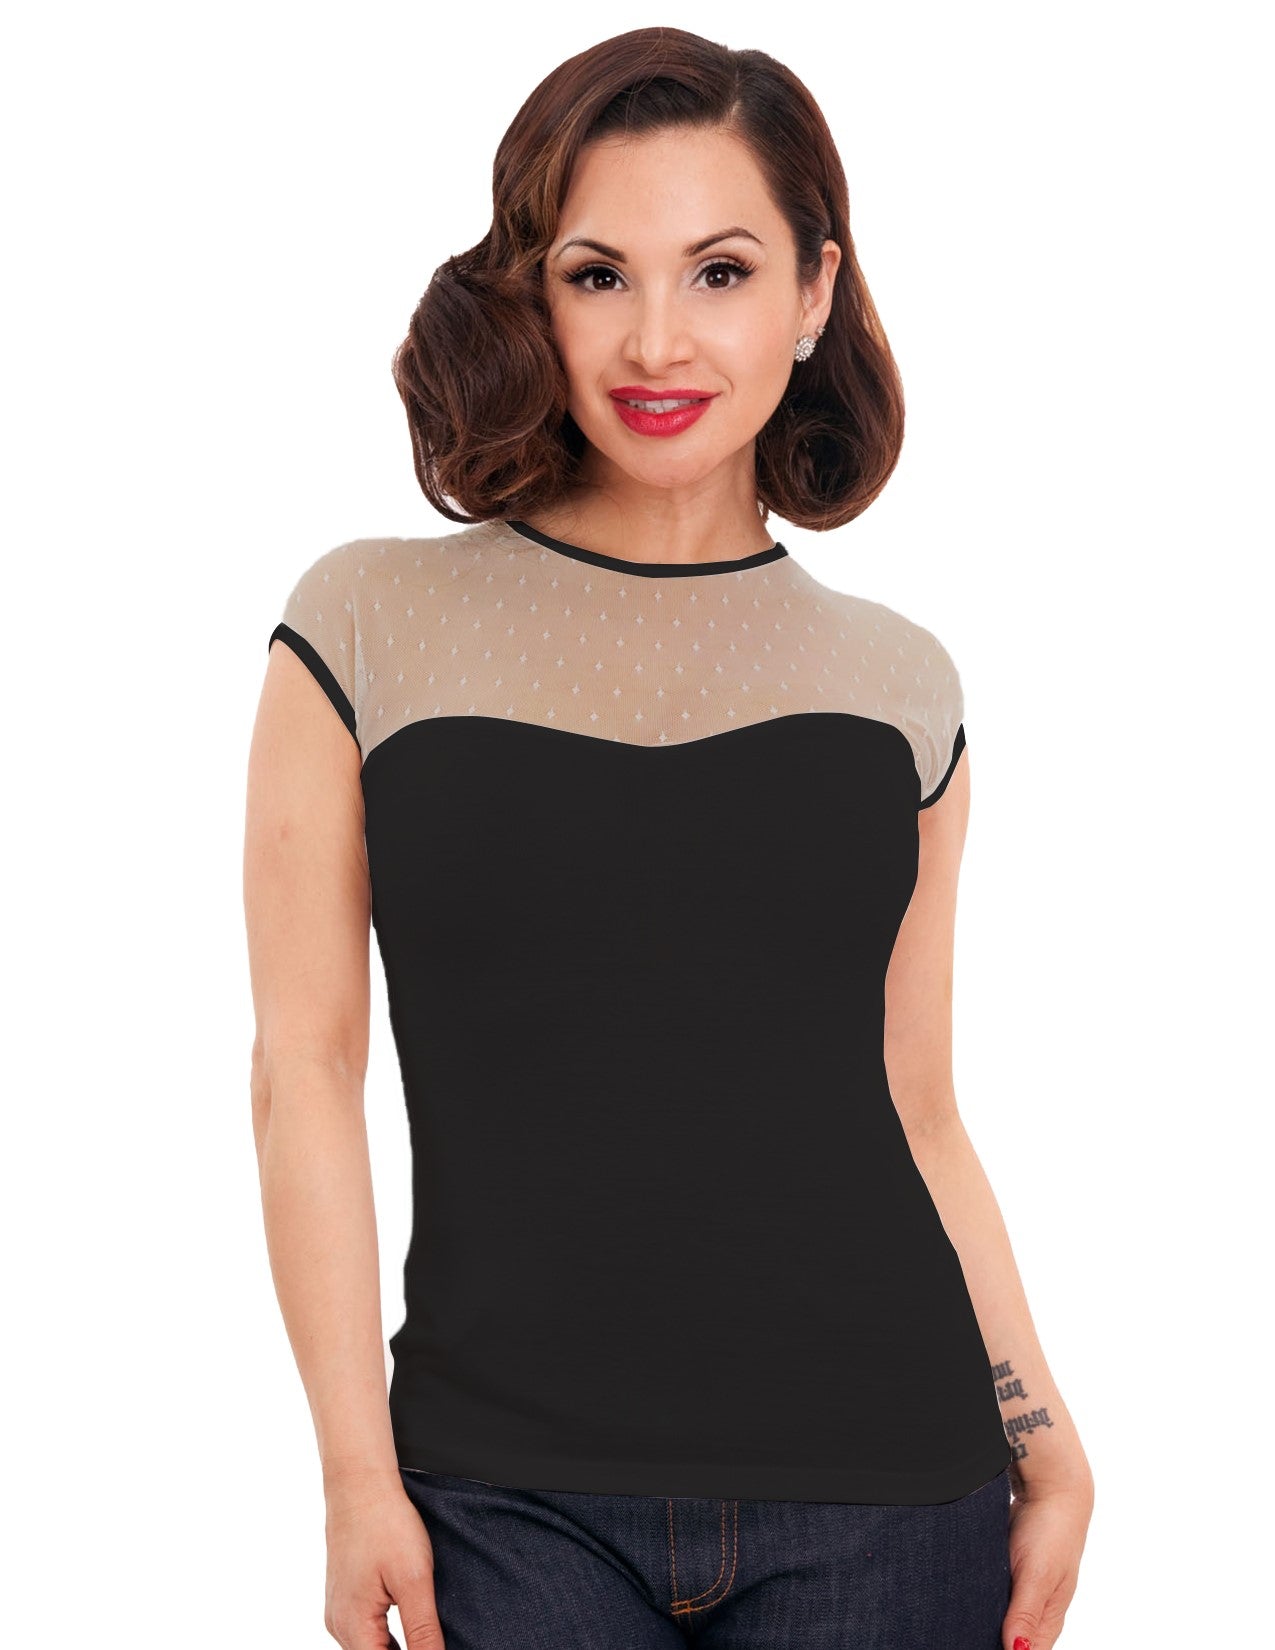 Miss Fancy Top in Black/Taupe